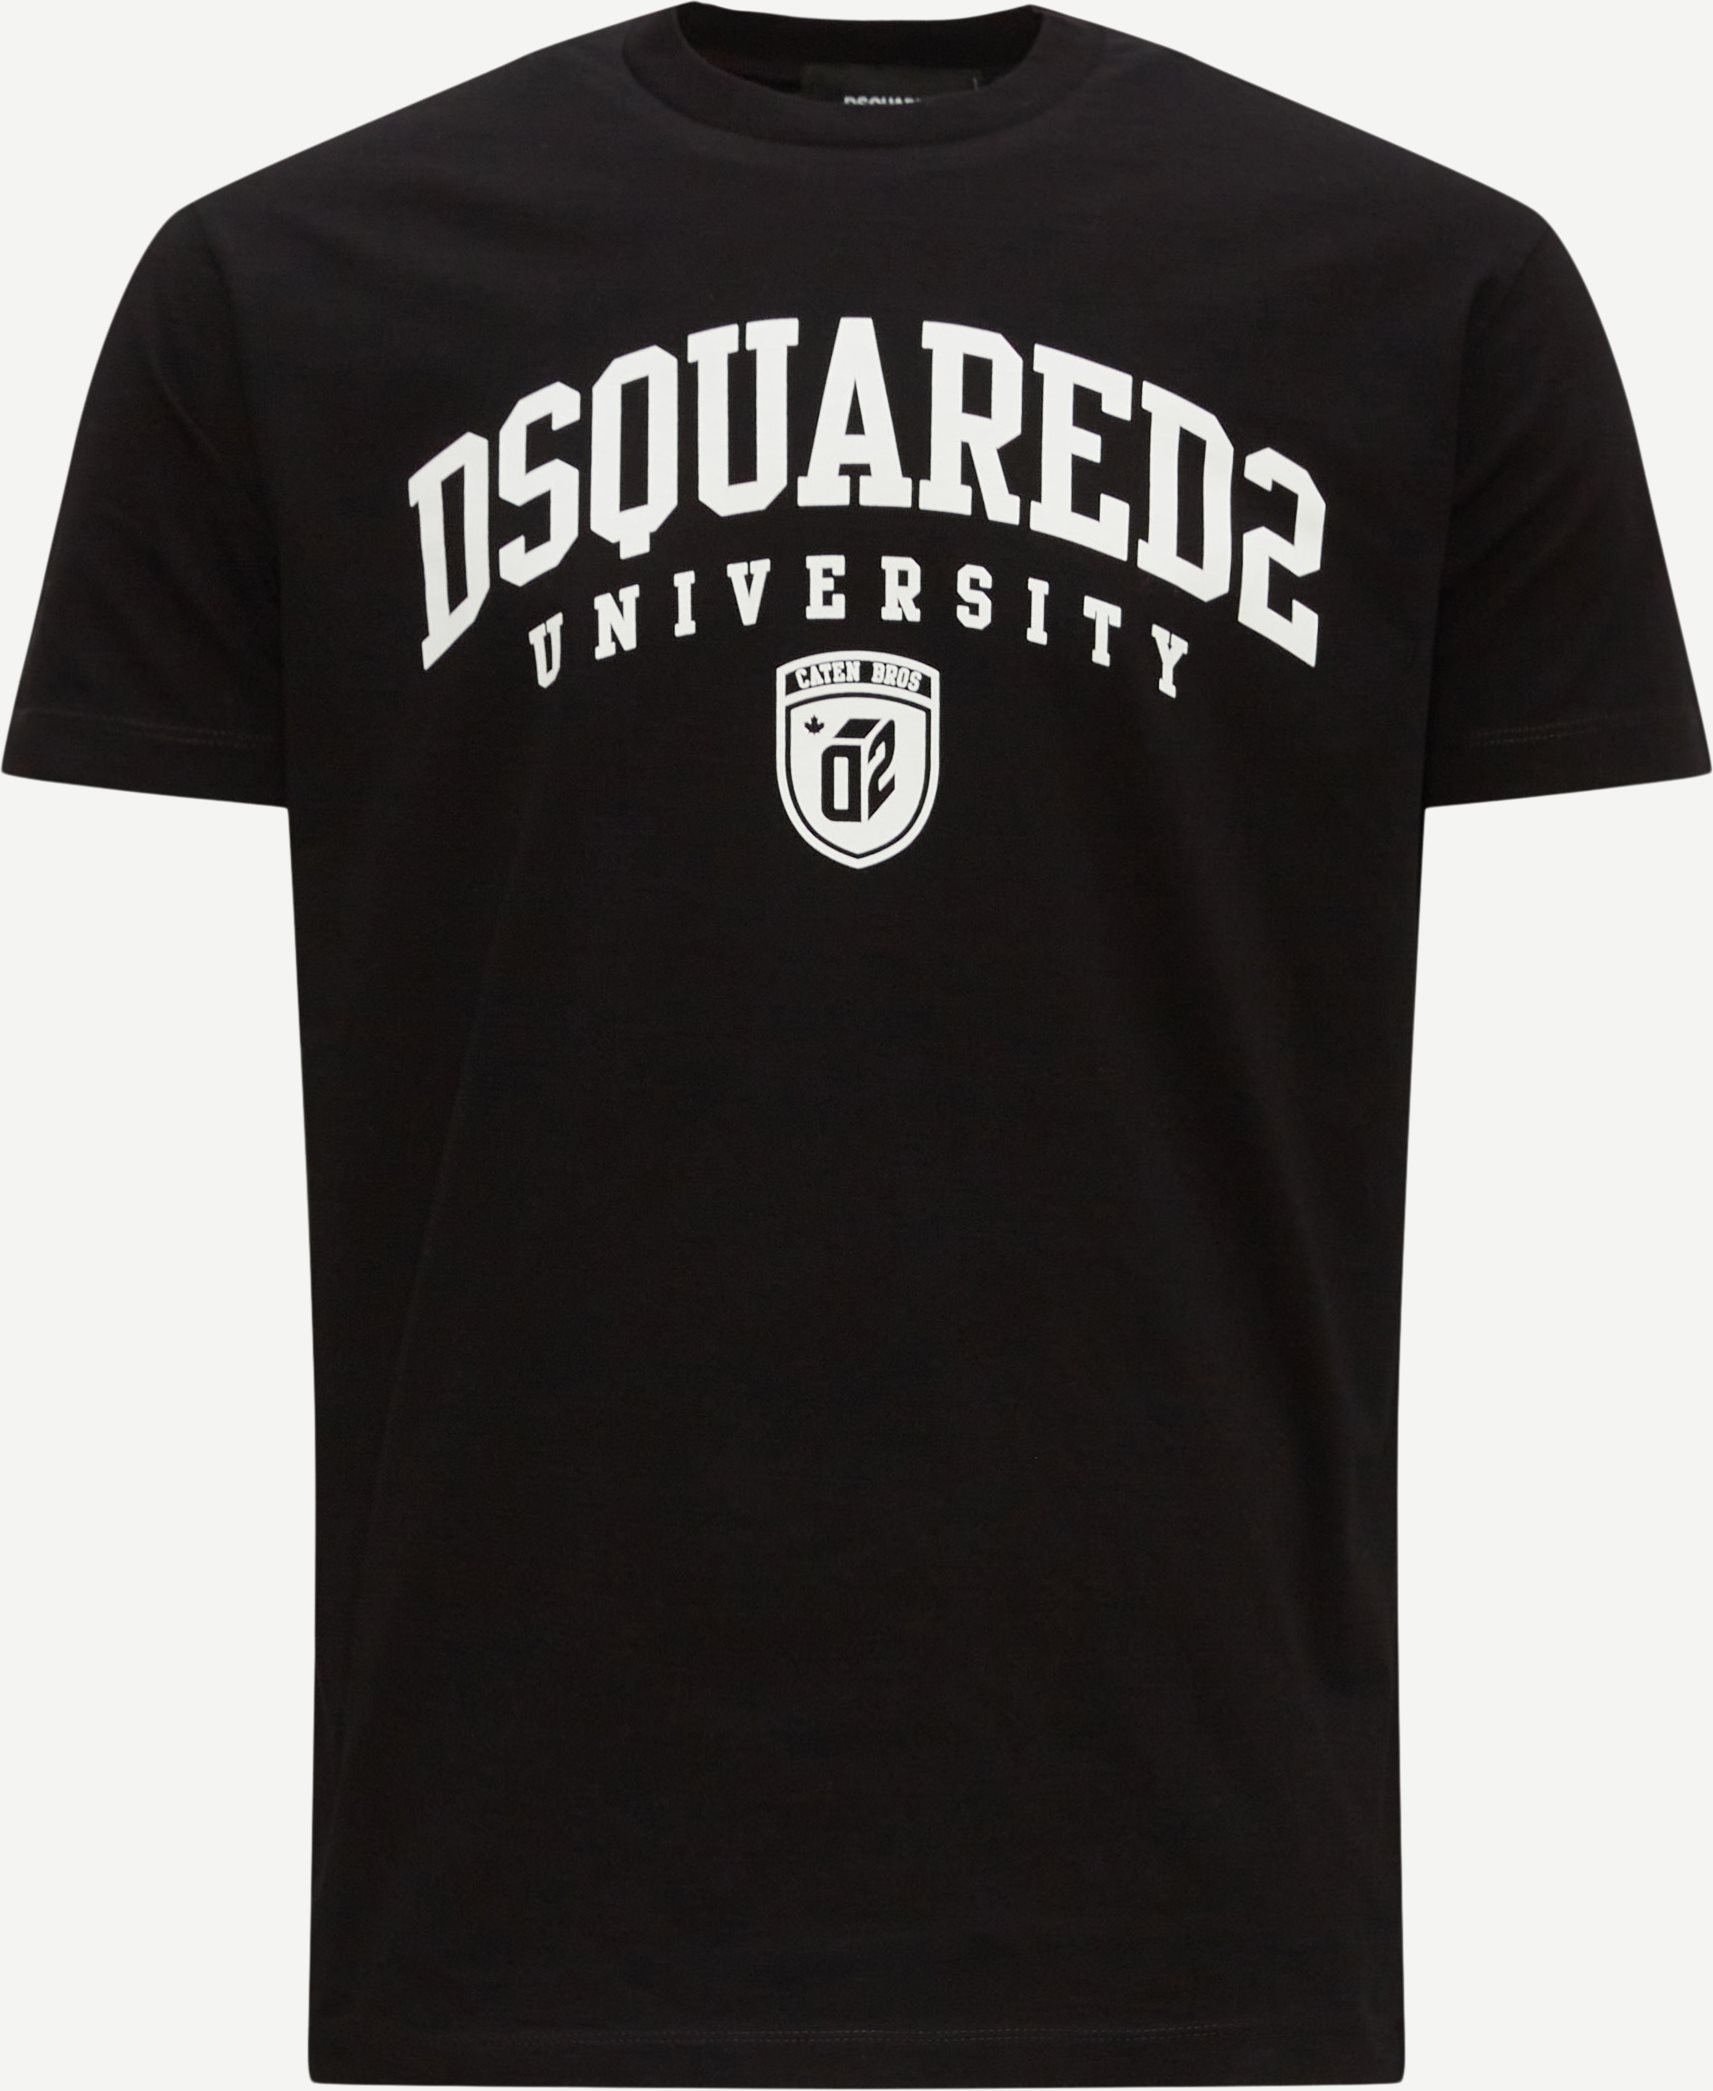 Dsquared2 T-shirts S74GD1166 S23009 Sort